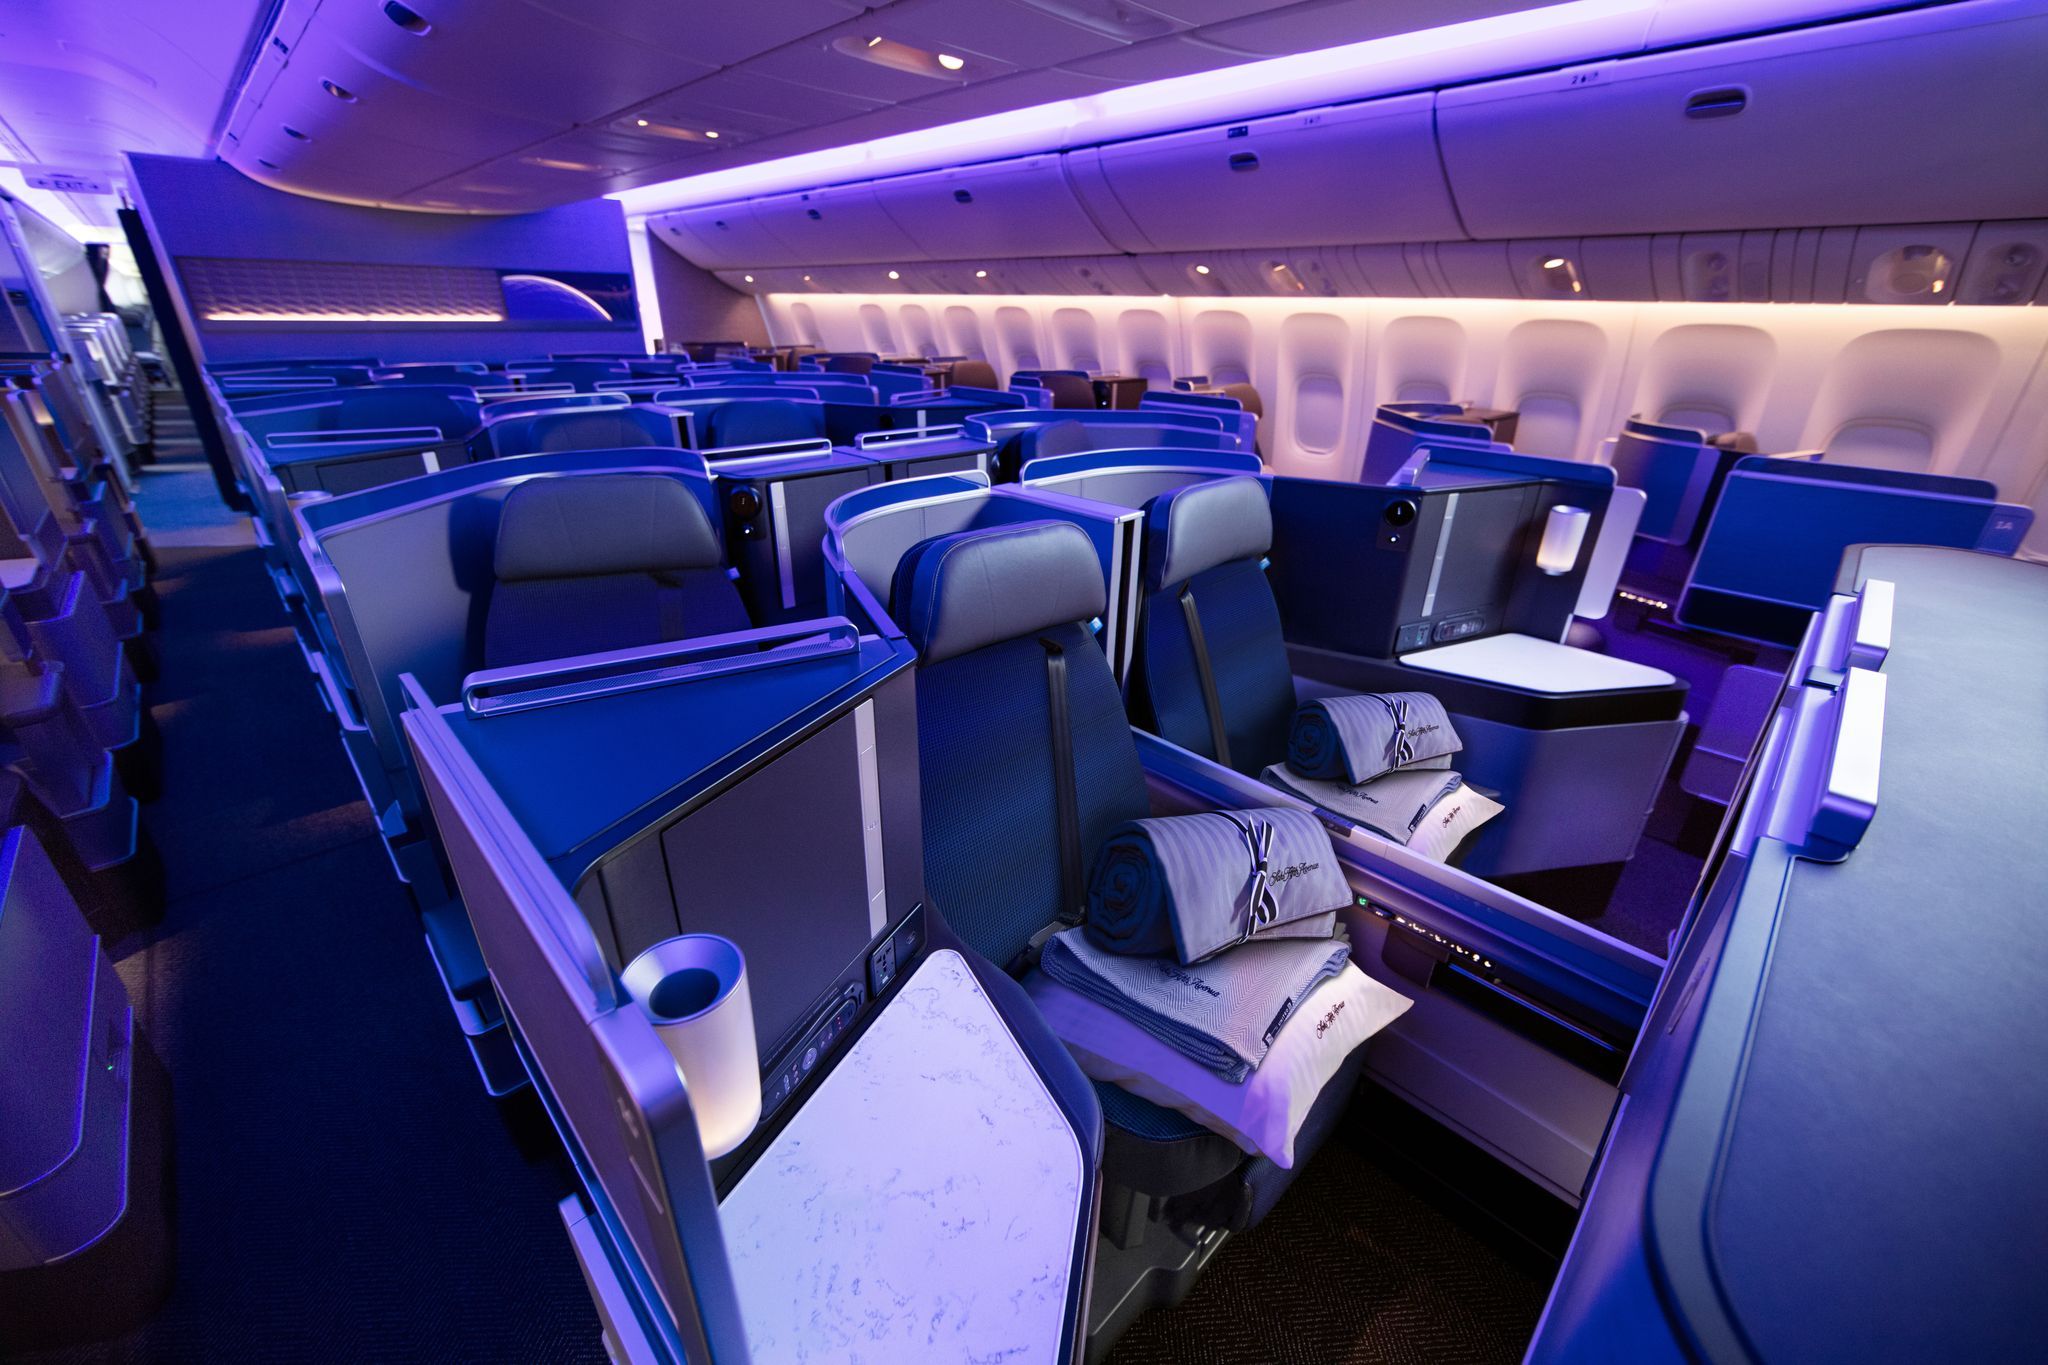 A panoramic view of the United Airlines Polaris Business class cabin.